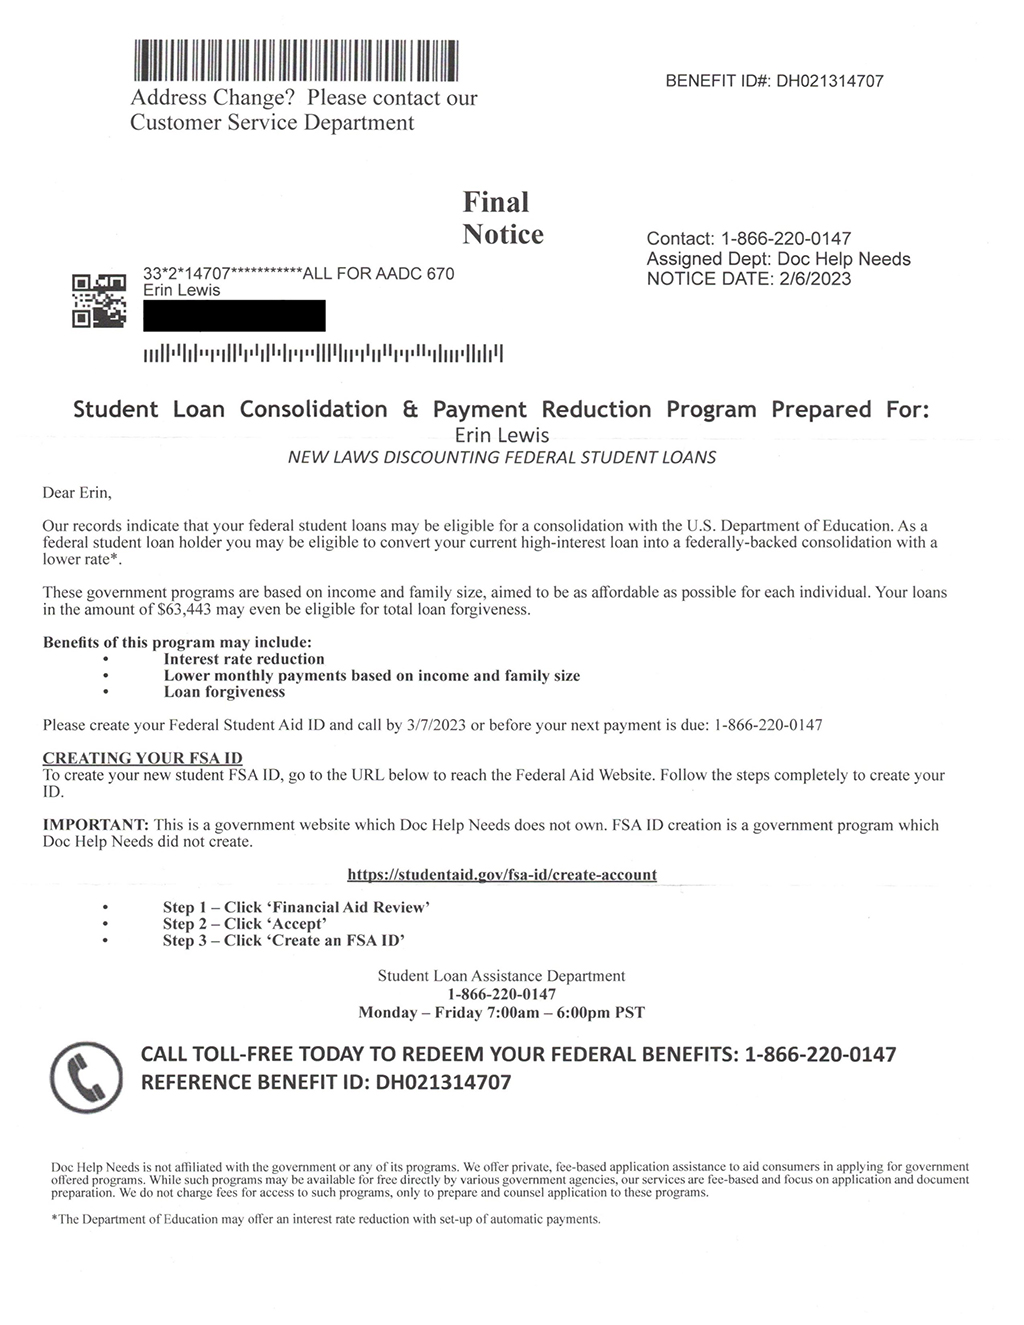 Doc Help Needs student loan letter